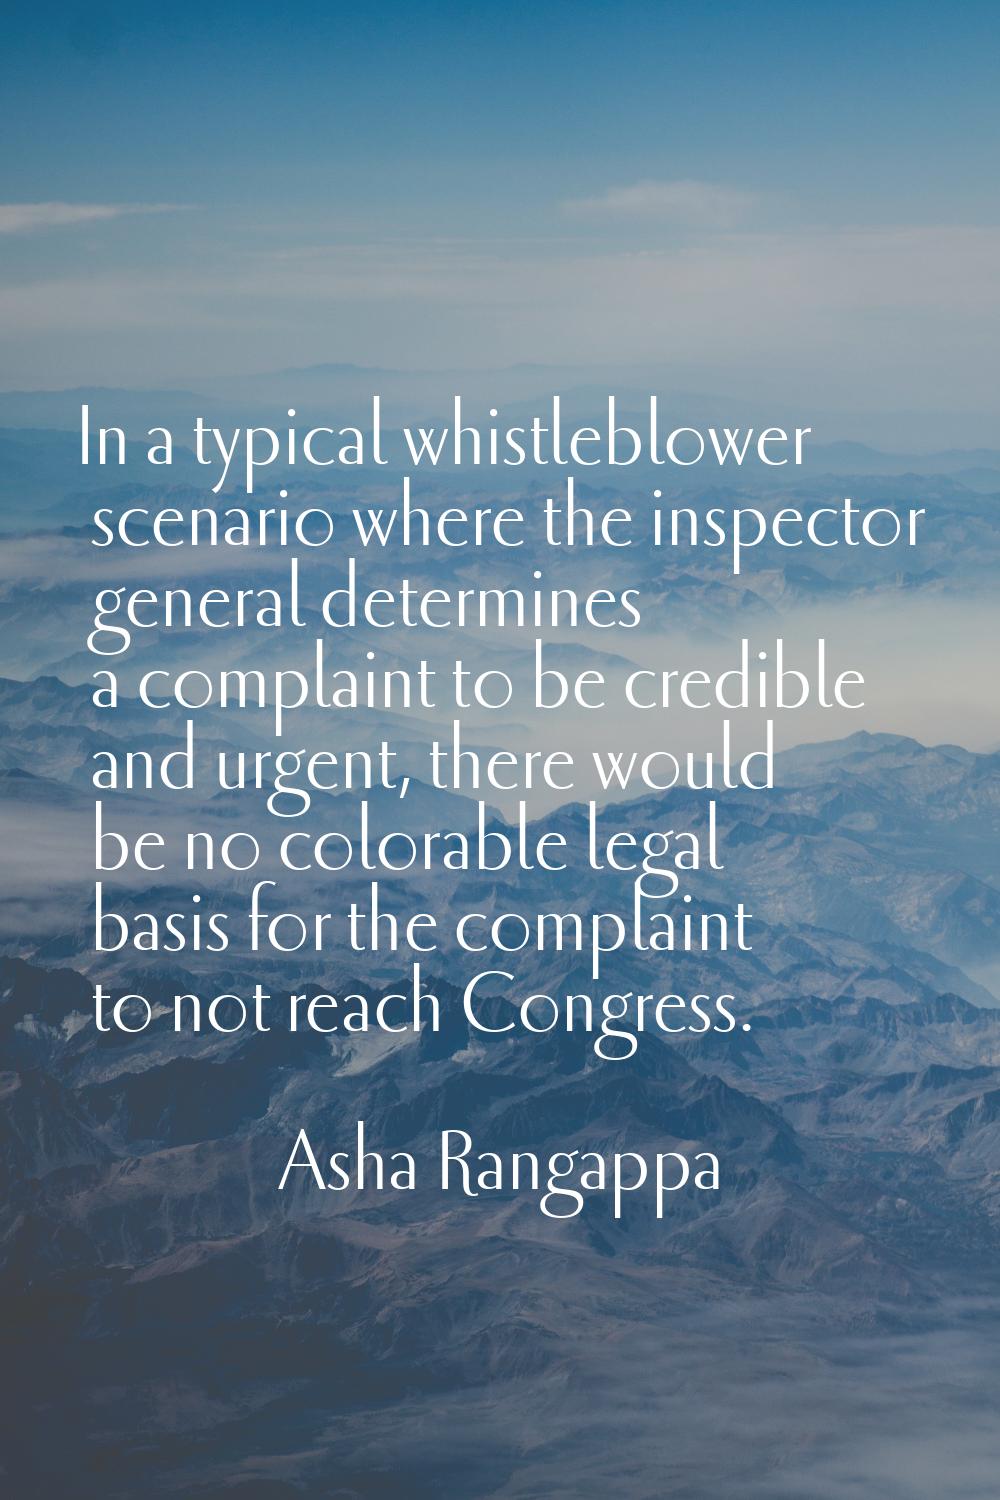 In a typical whistleblower scenario where the inspector general determines a complaint to be credib